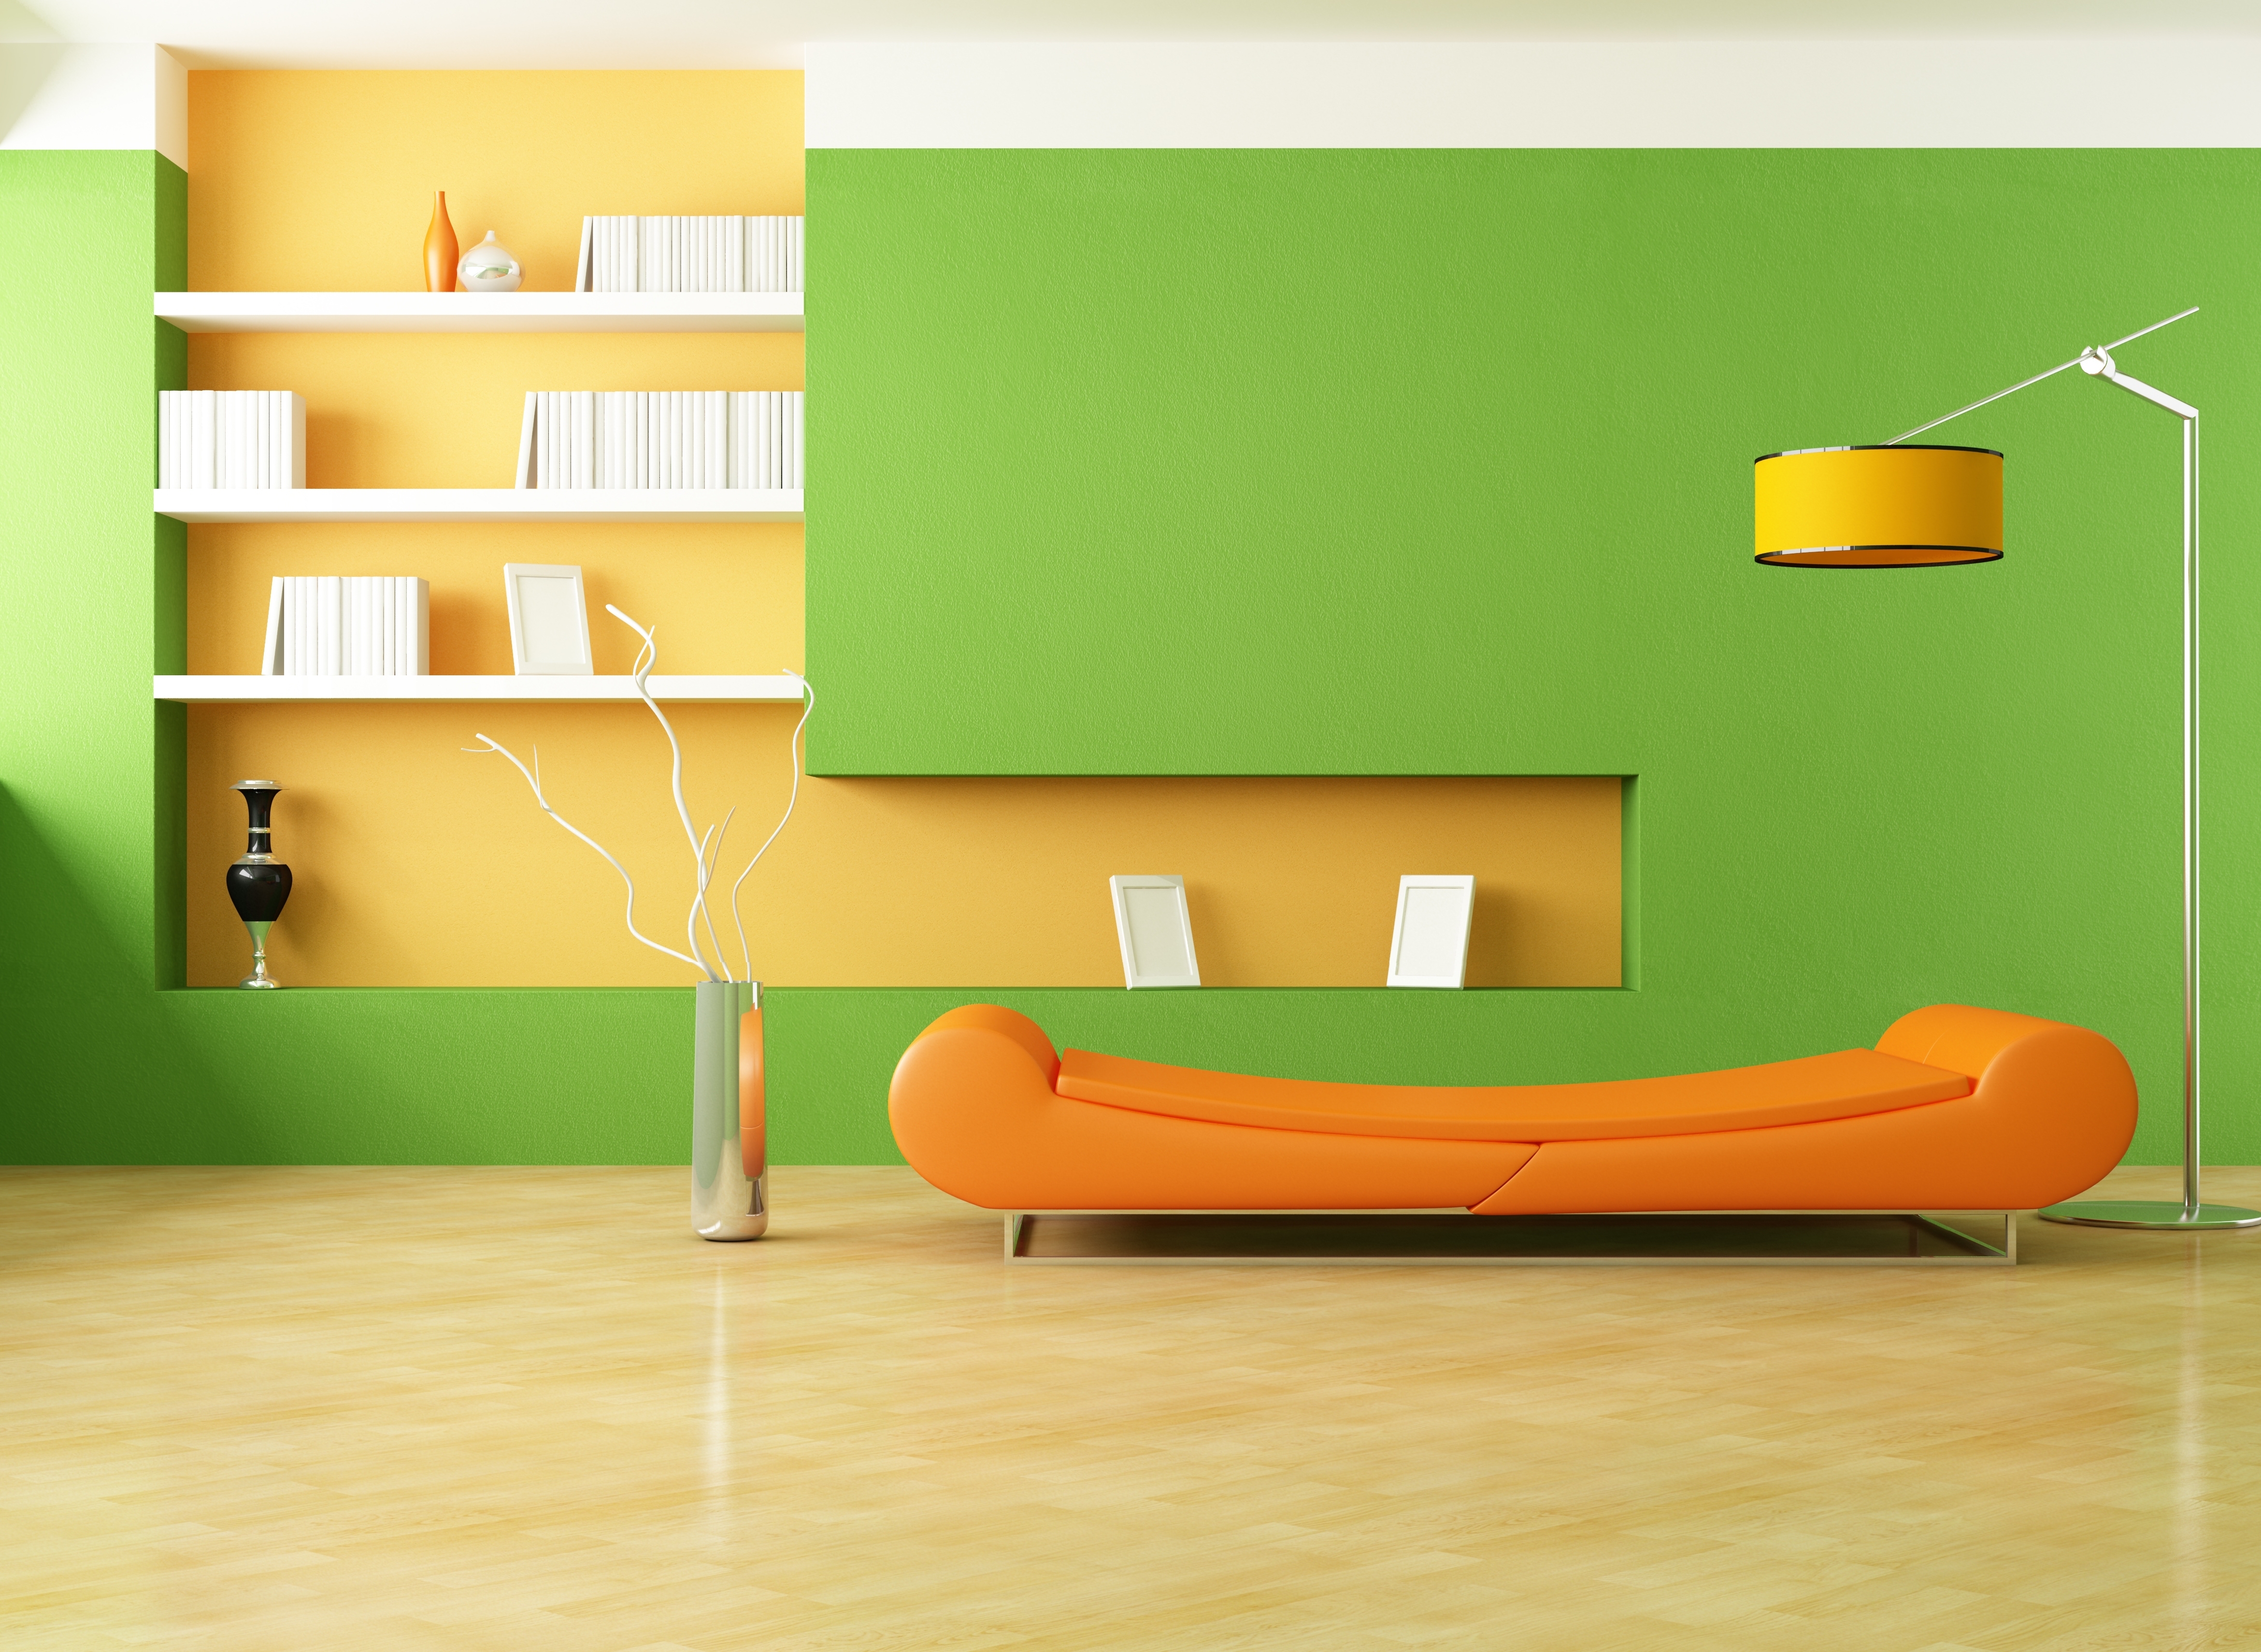 140108 download wallpaper orange, interior, miscellanea, miscellaneous, minimalism, design, lamp, room, style, sofa, vases screensavers and pictures for free